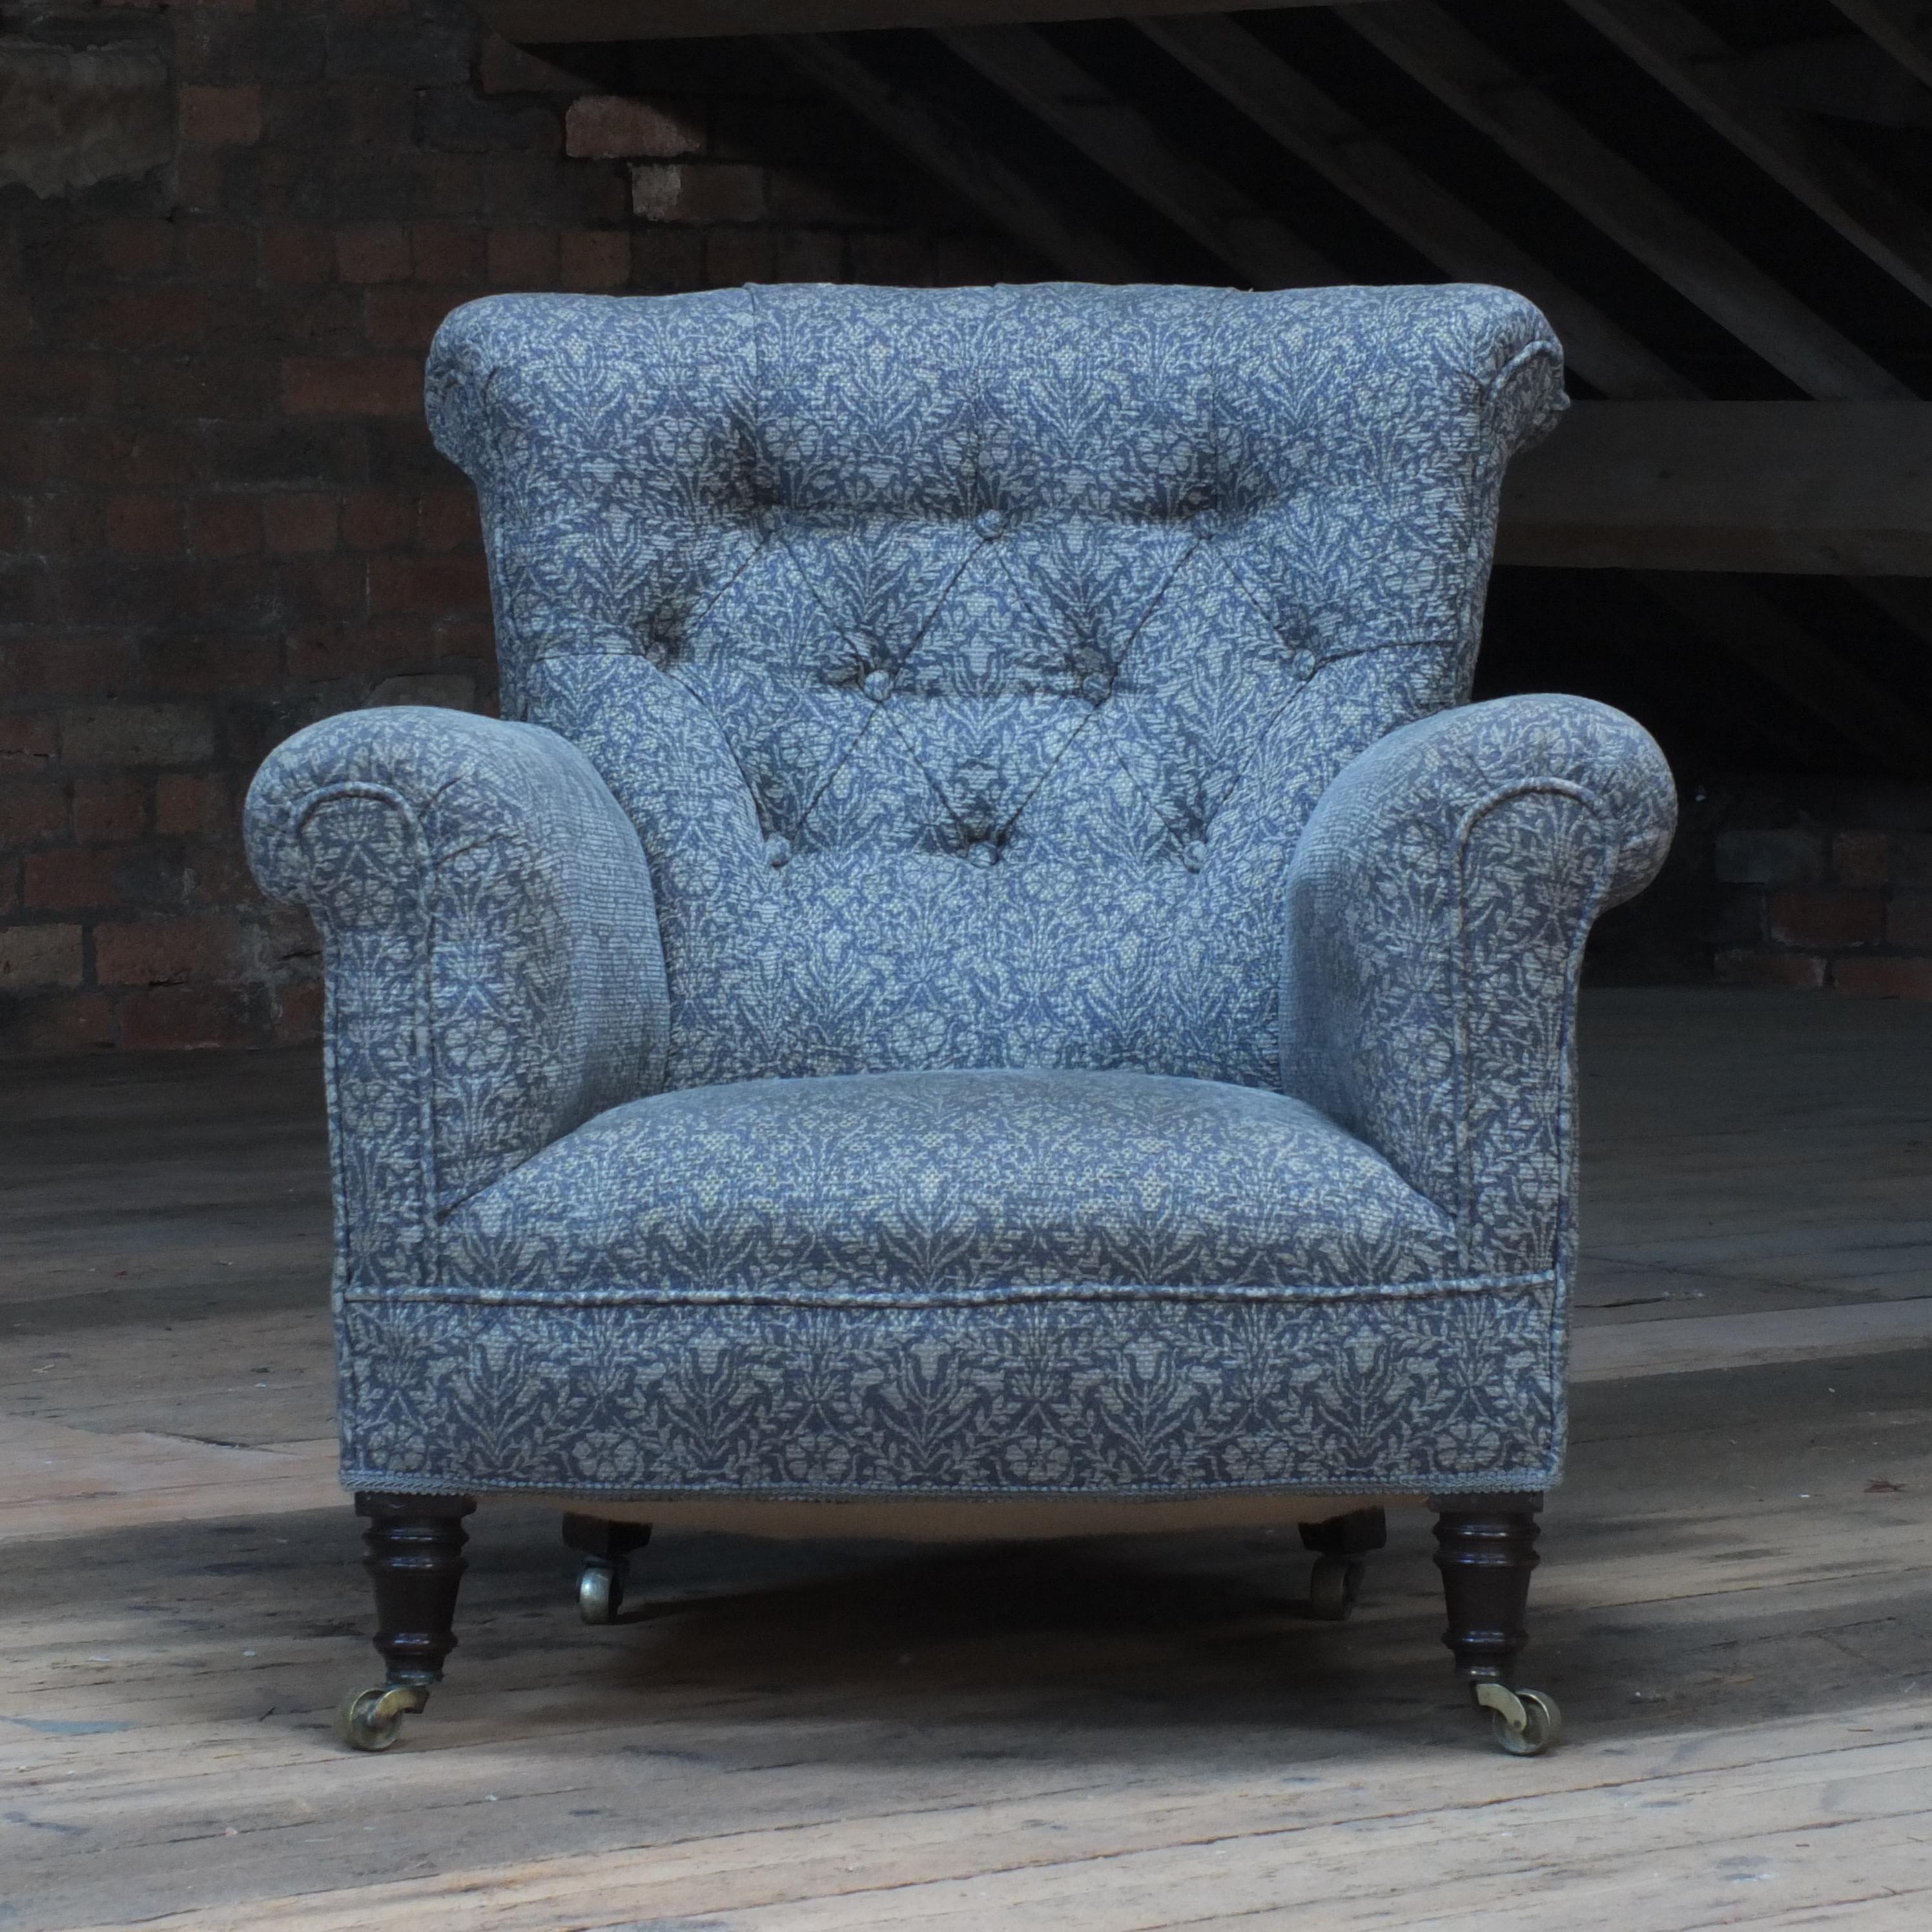 A good Victorian Howard woodstock style armchair. Recent upholstery in good order and very much ready to go and I believe its a William Morris designed fabric. We so also offer upholstery should you wish to change it!

Measures: 82cm deep
81cm